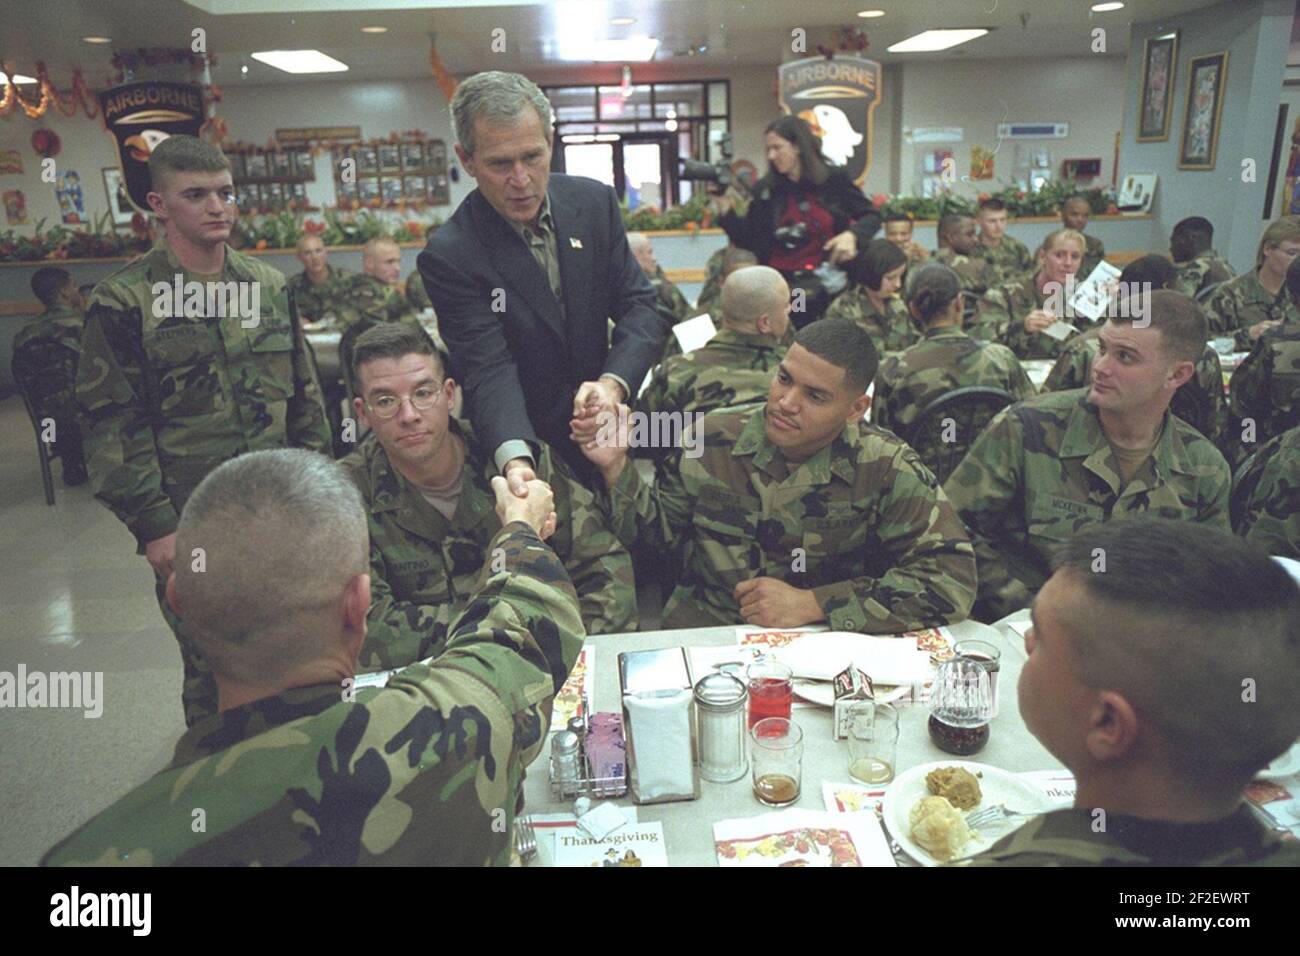 President George W. Bush Shakes Hands with Soldiers During a Thanksgiving Meal at Fort Campbell, Kentucky. Stock Photo